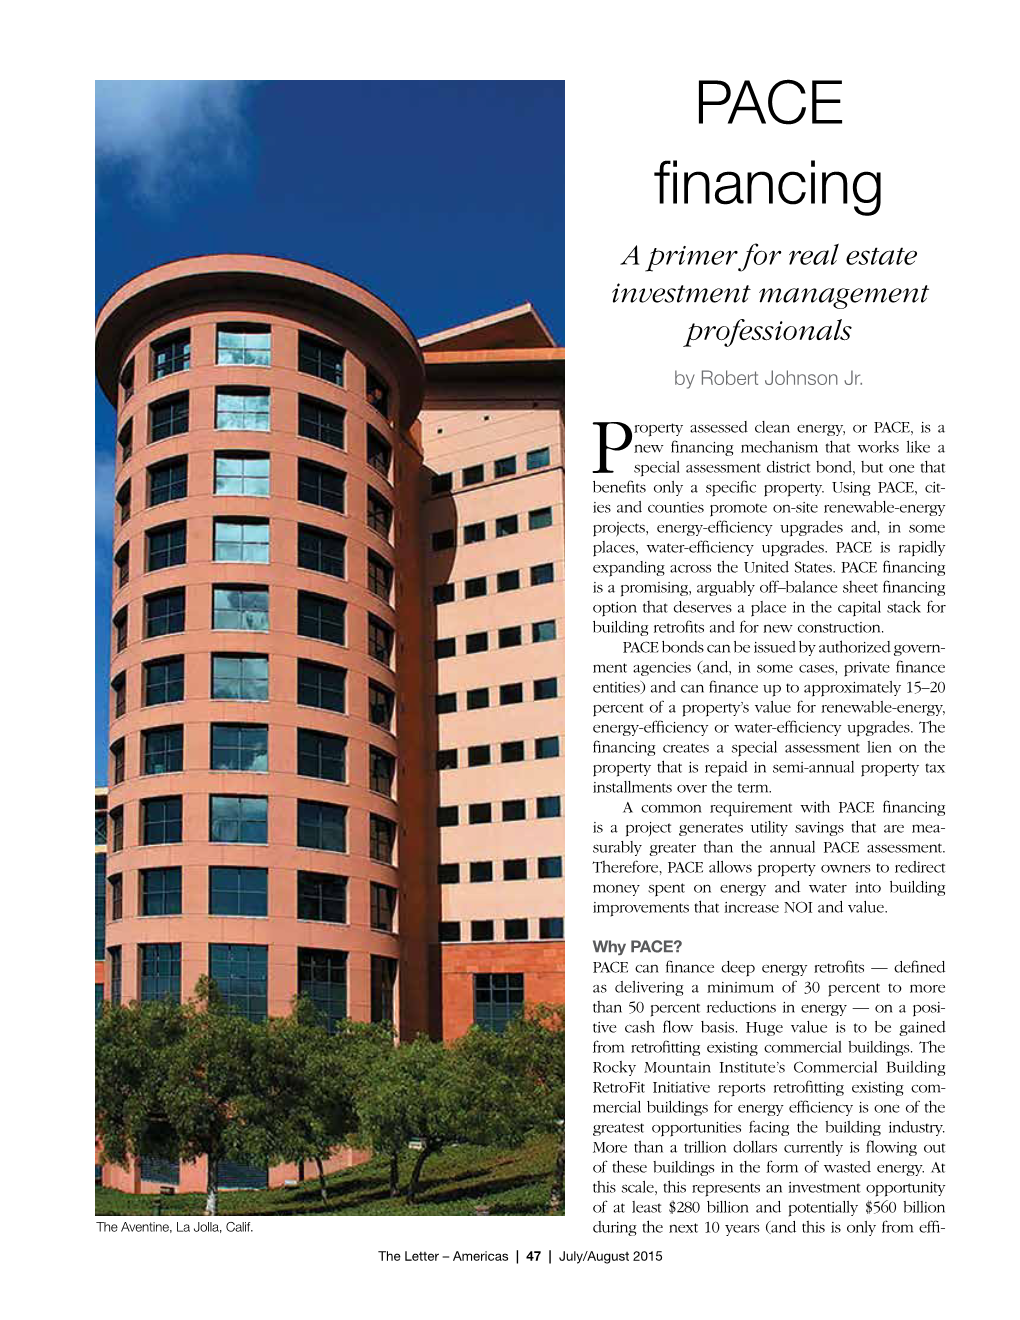 PACE Financing a Primer for Real Estate Investment Management Professionals